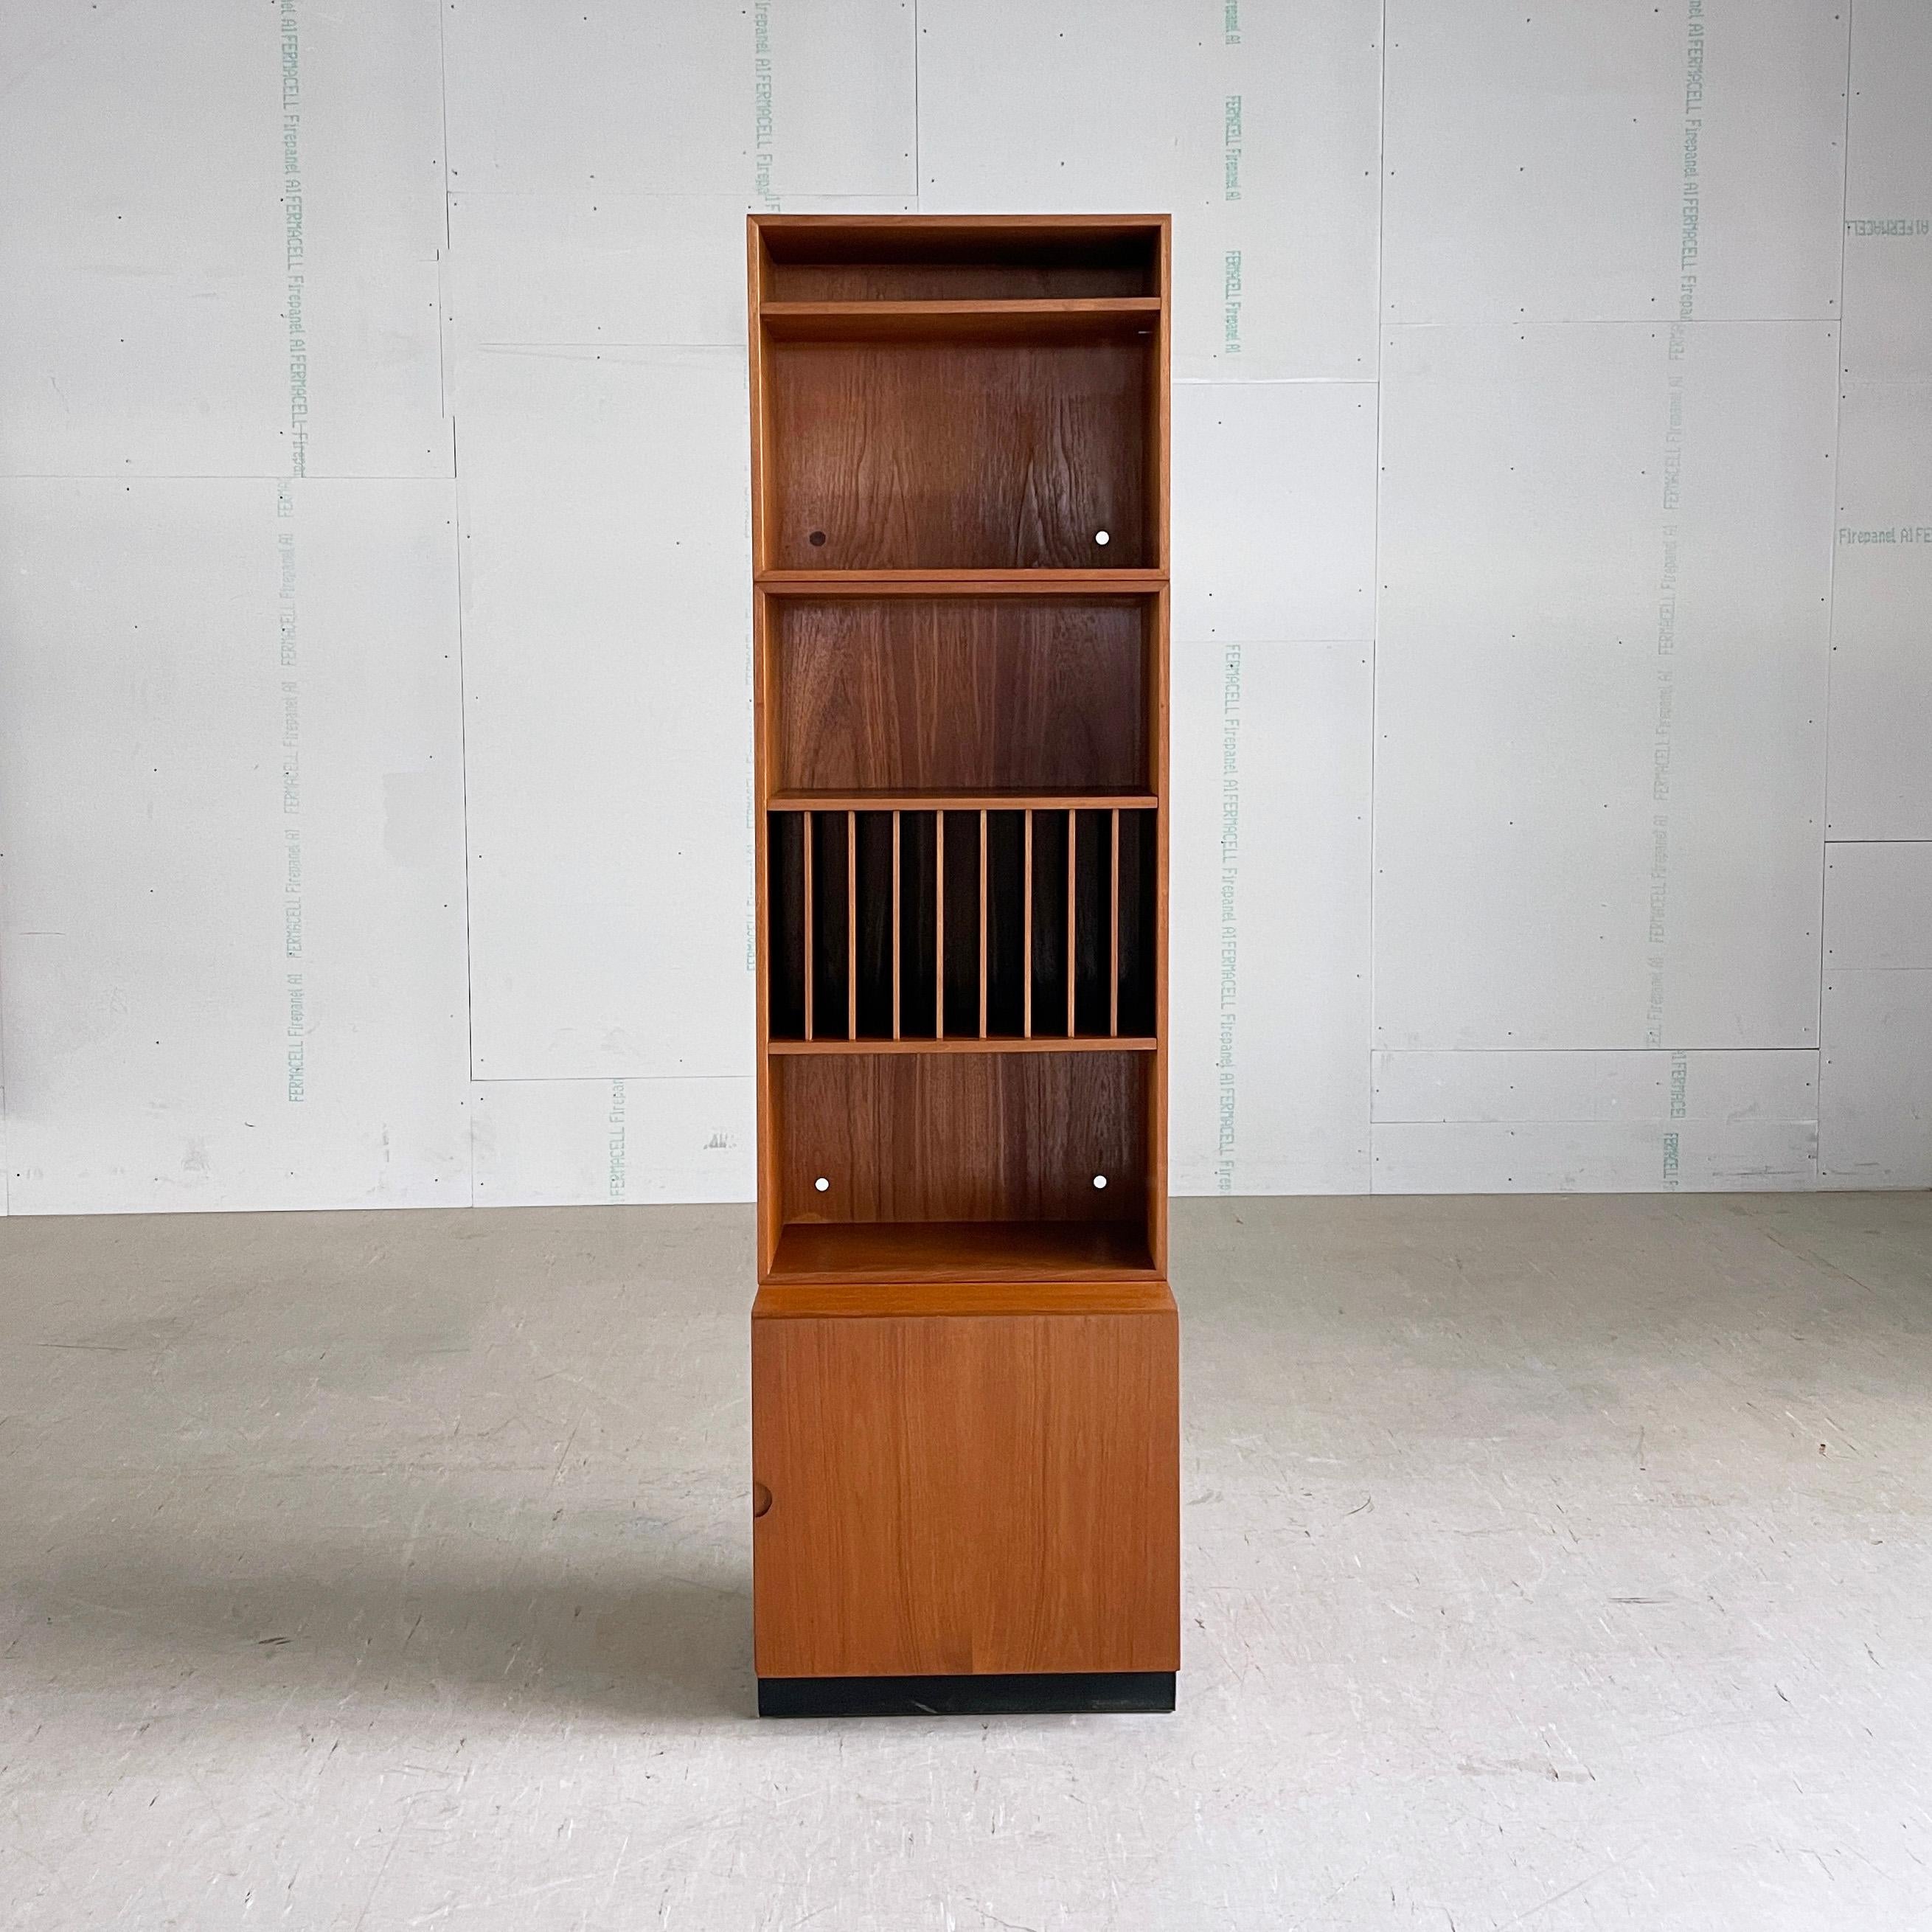 1960’s Bramin ‘System 160’ modular stereo cabinet / storage system. Designed by Sven Ellekaer, Denmark. Consists of three separate stackable units with teak veneer. Upper module with one height adjustable shelf. Middle section with LP rack and two